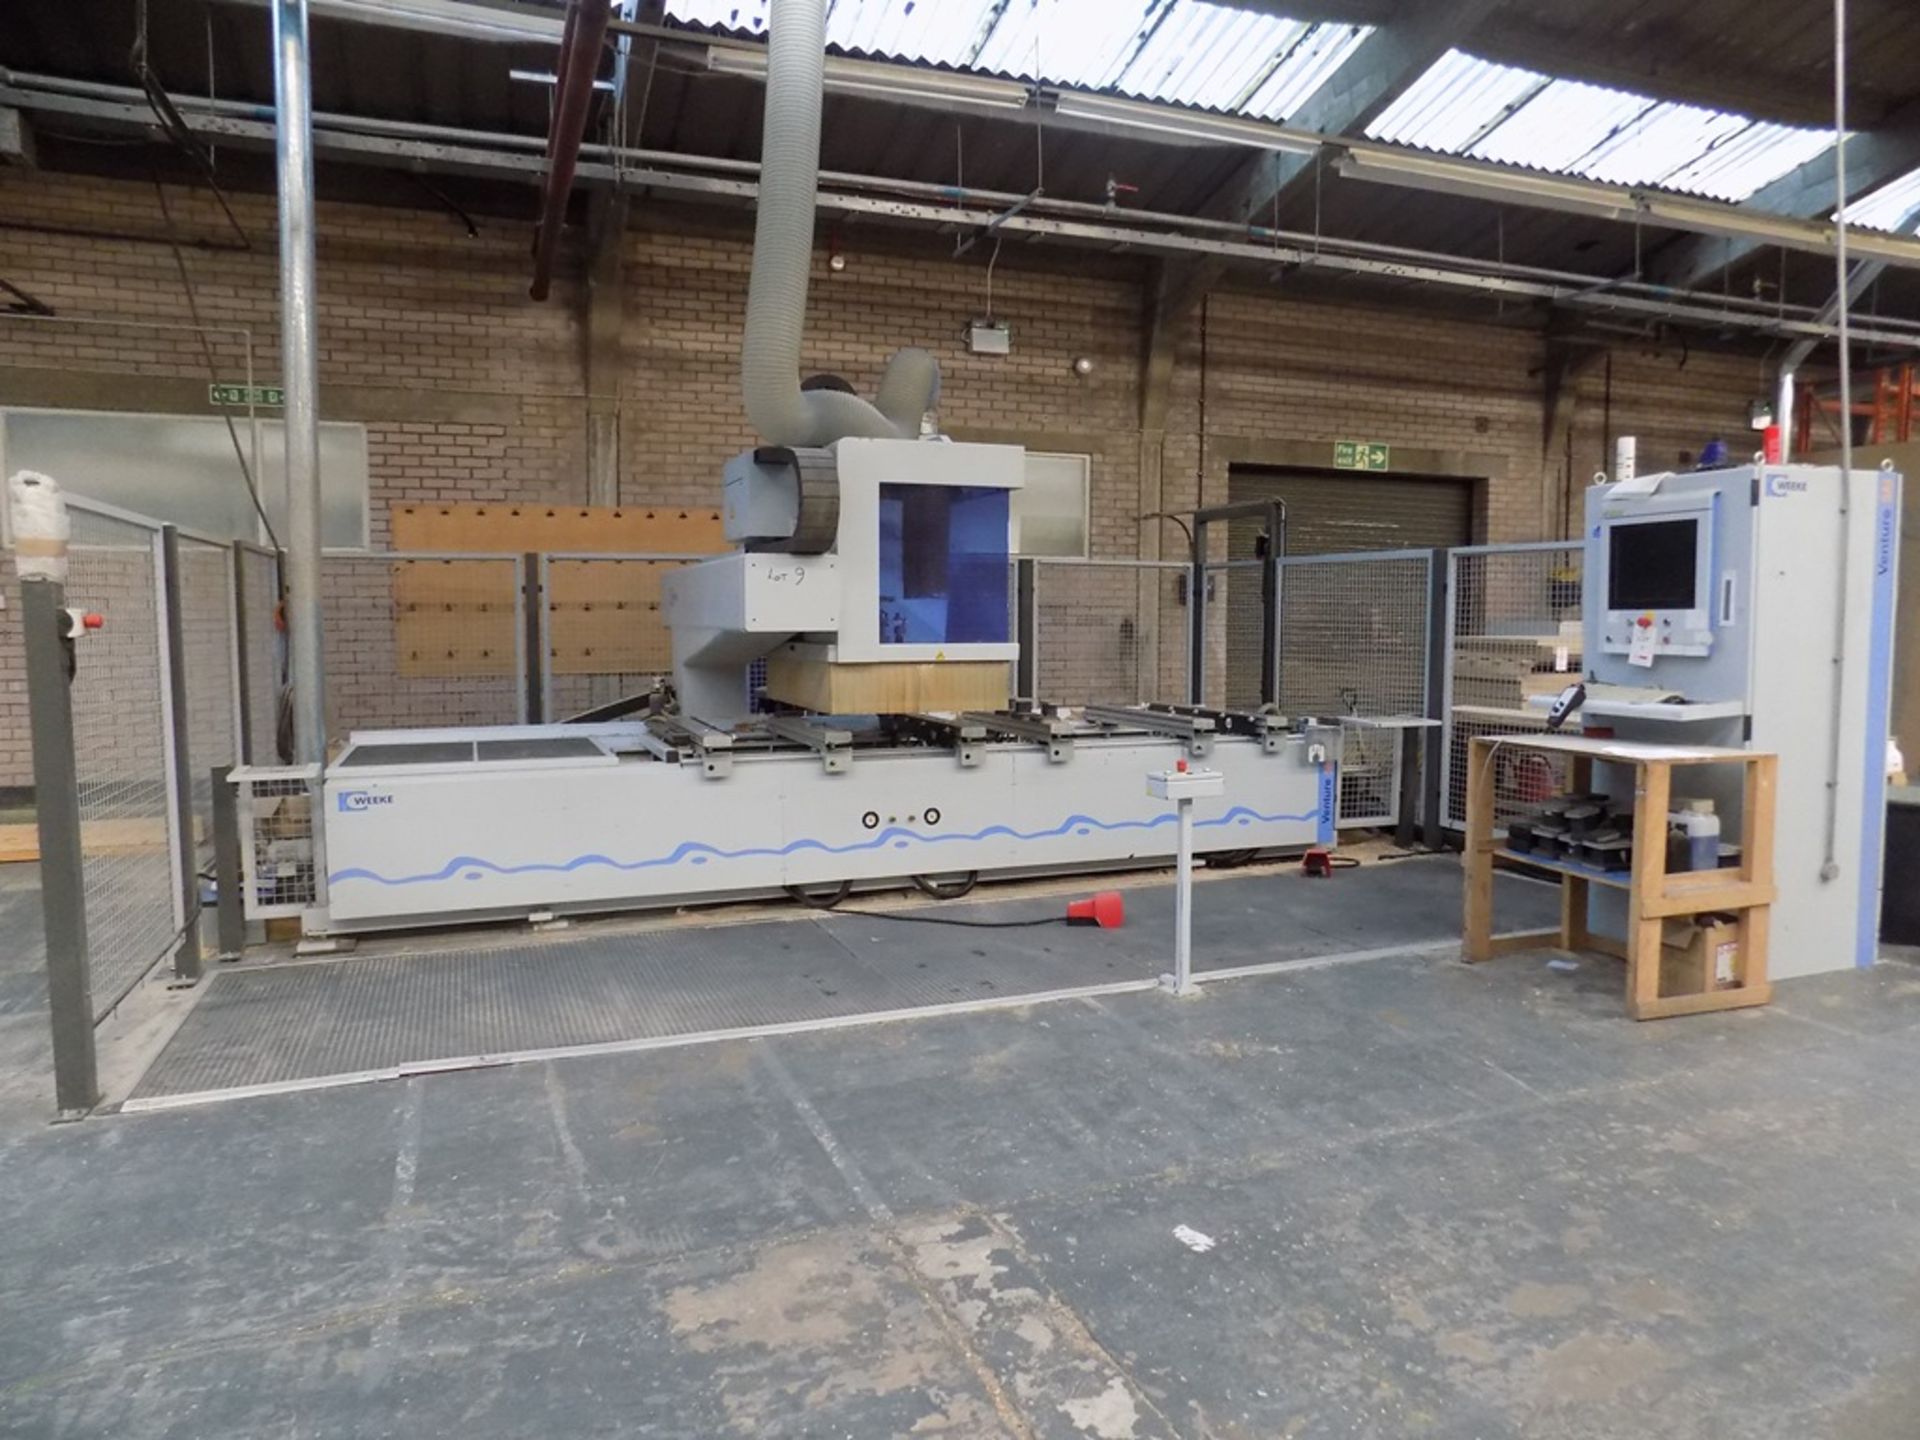 Weeke Optimat BHC Venture 5M CNC router with two tool carousels, Serial no. 0-250-12-2266 (2008),